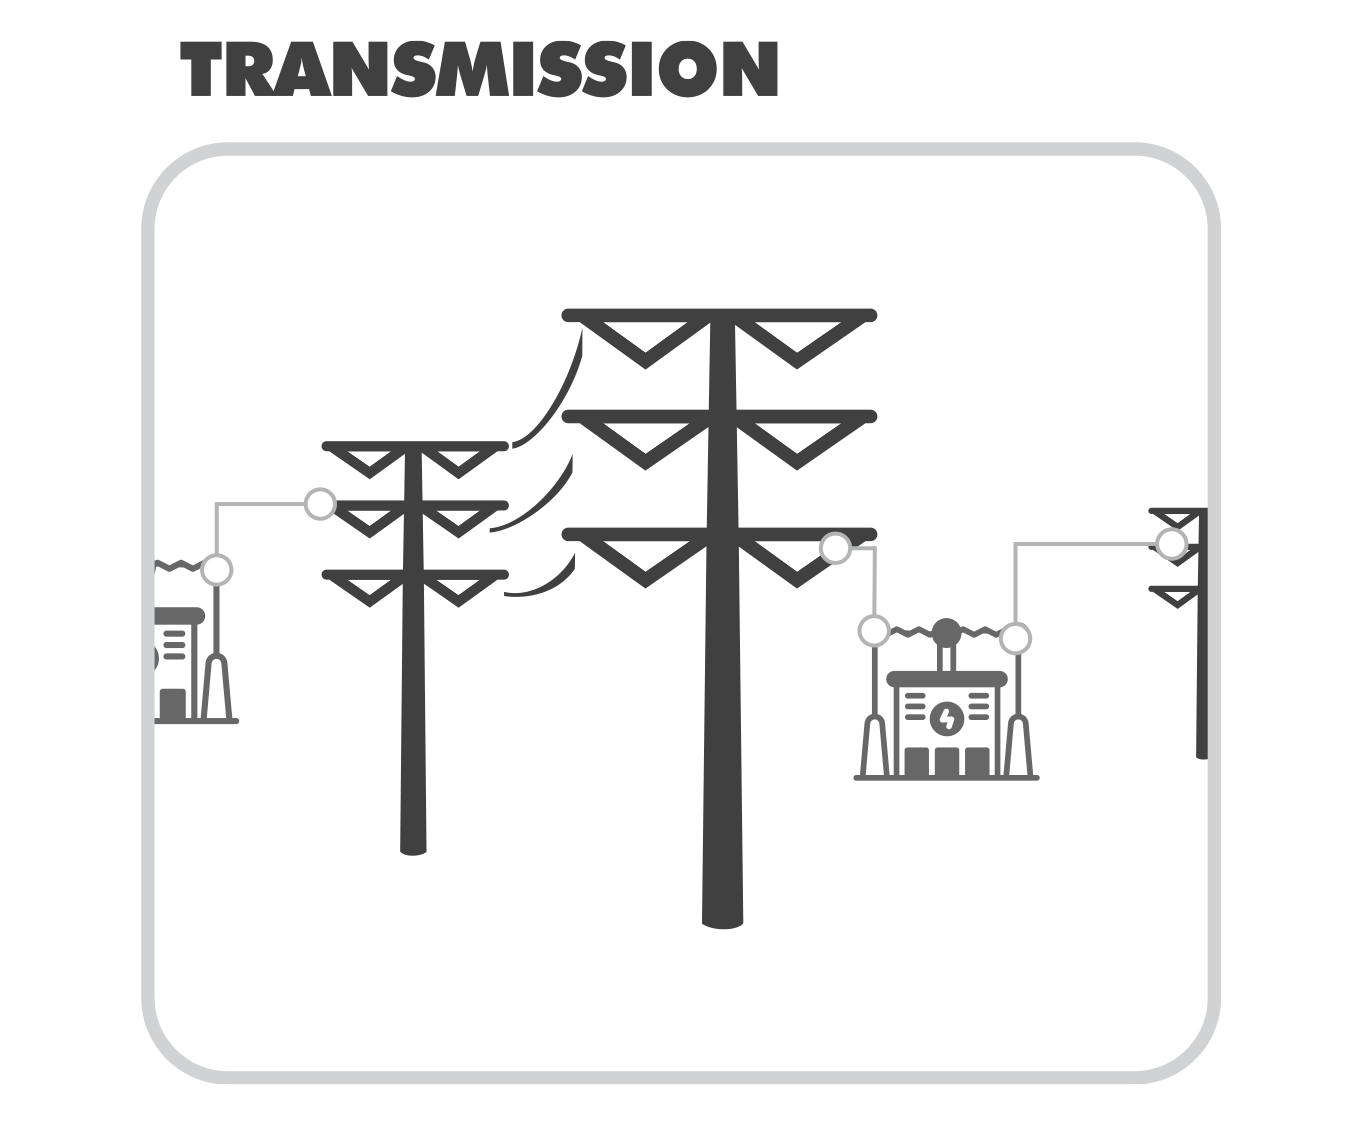 Energy received by the substation is transmitted across an extensive regional grid, and sent to local substations where it is transmitted to local lines